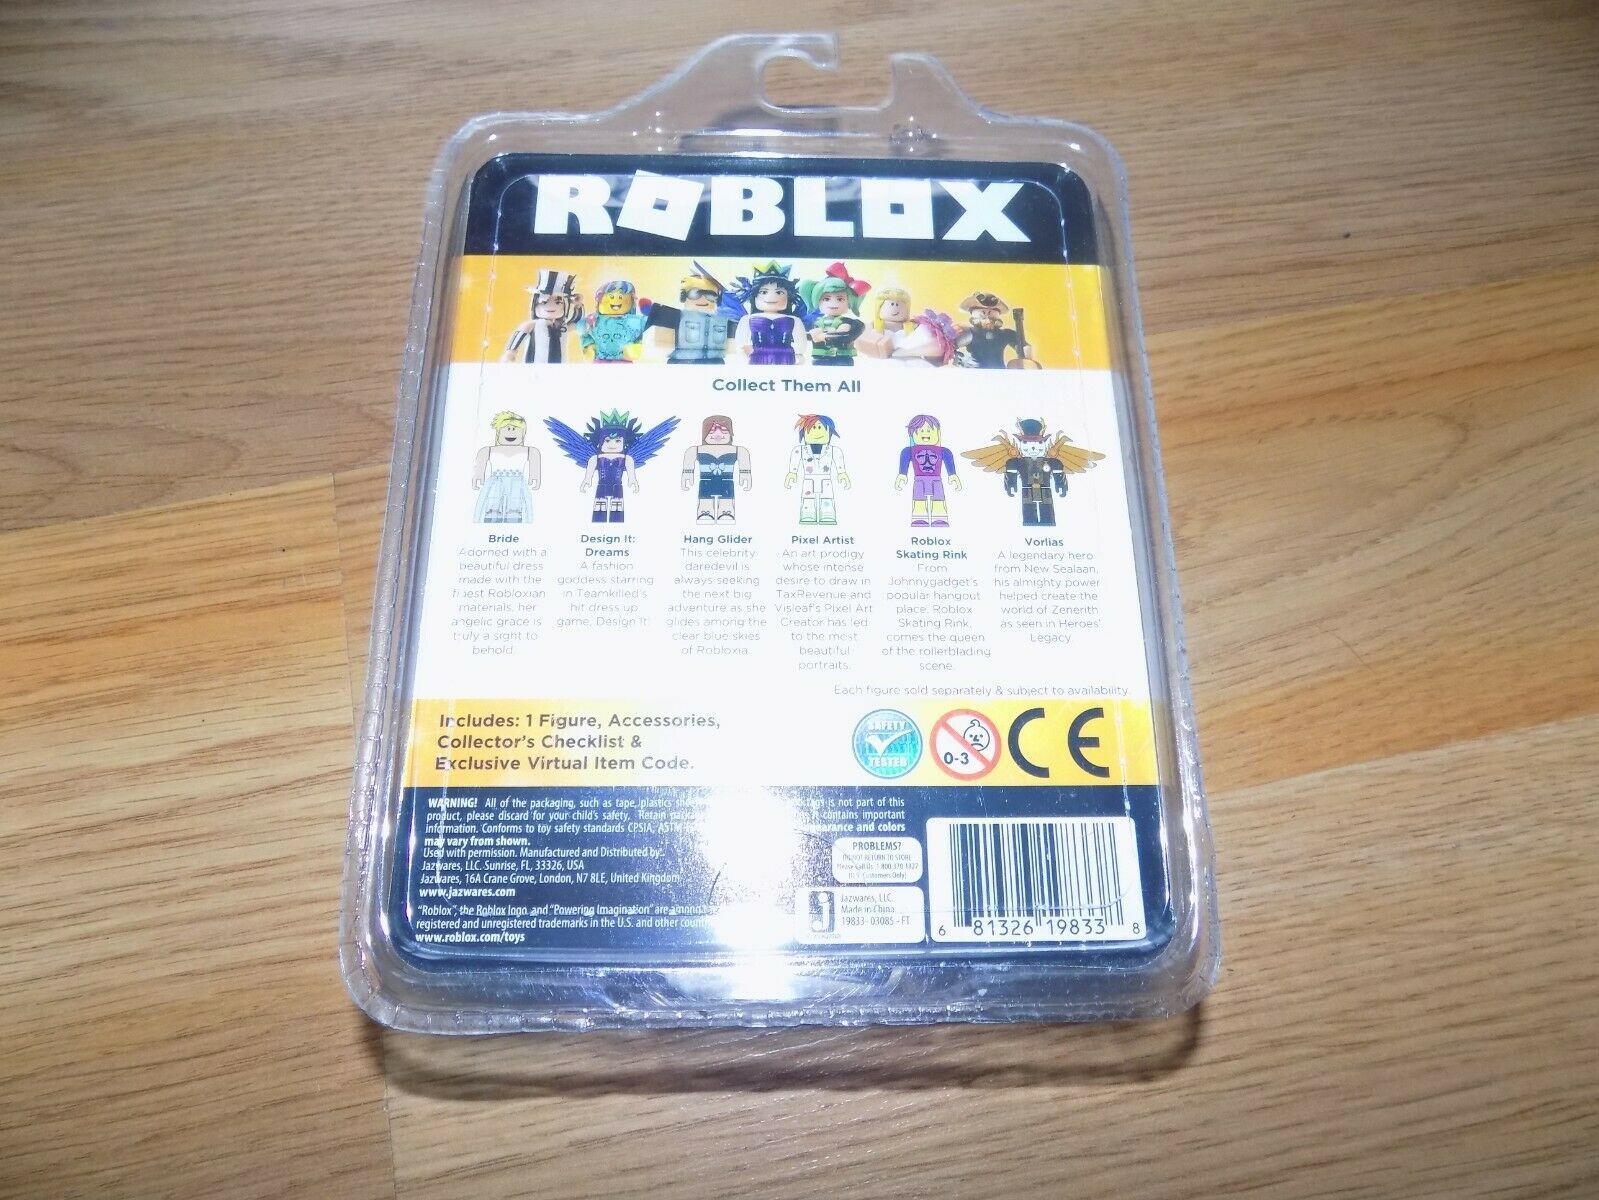 Roblox Bride Action Figure Toy Mix Match And 50 Similar Items - details about new roblox bride with code